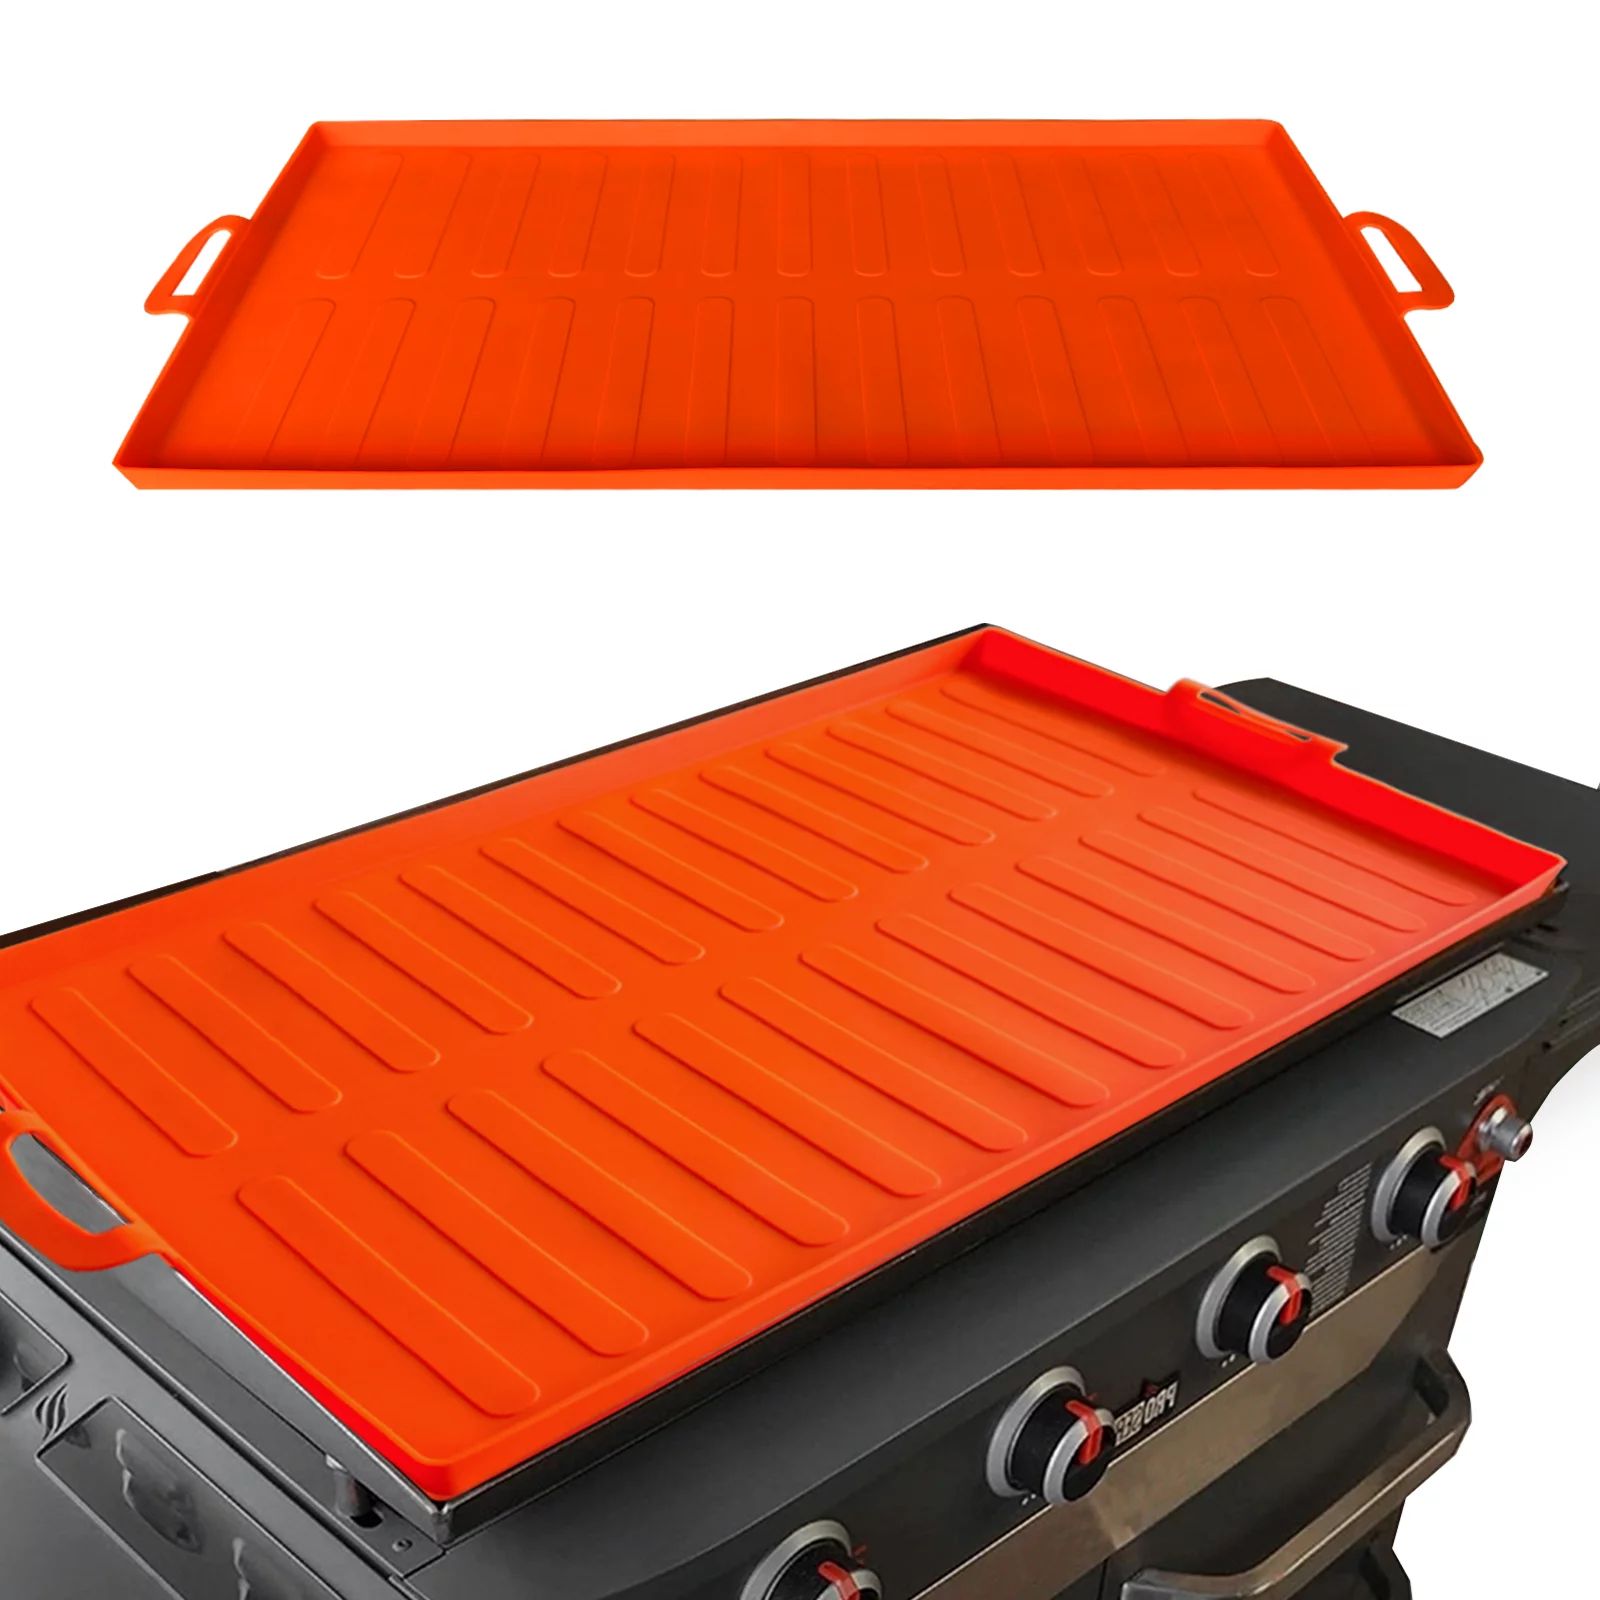 Artnice 36" Silicone Griddle Mat for Blackstone with Handles, Outdoor Grill Cover Mat, Orange | Walmart (US)